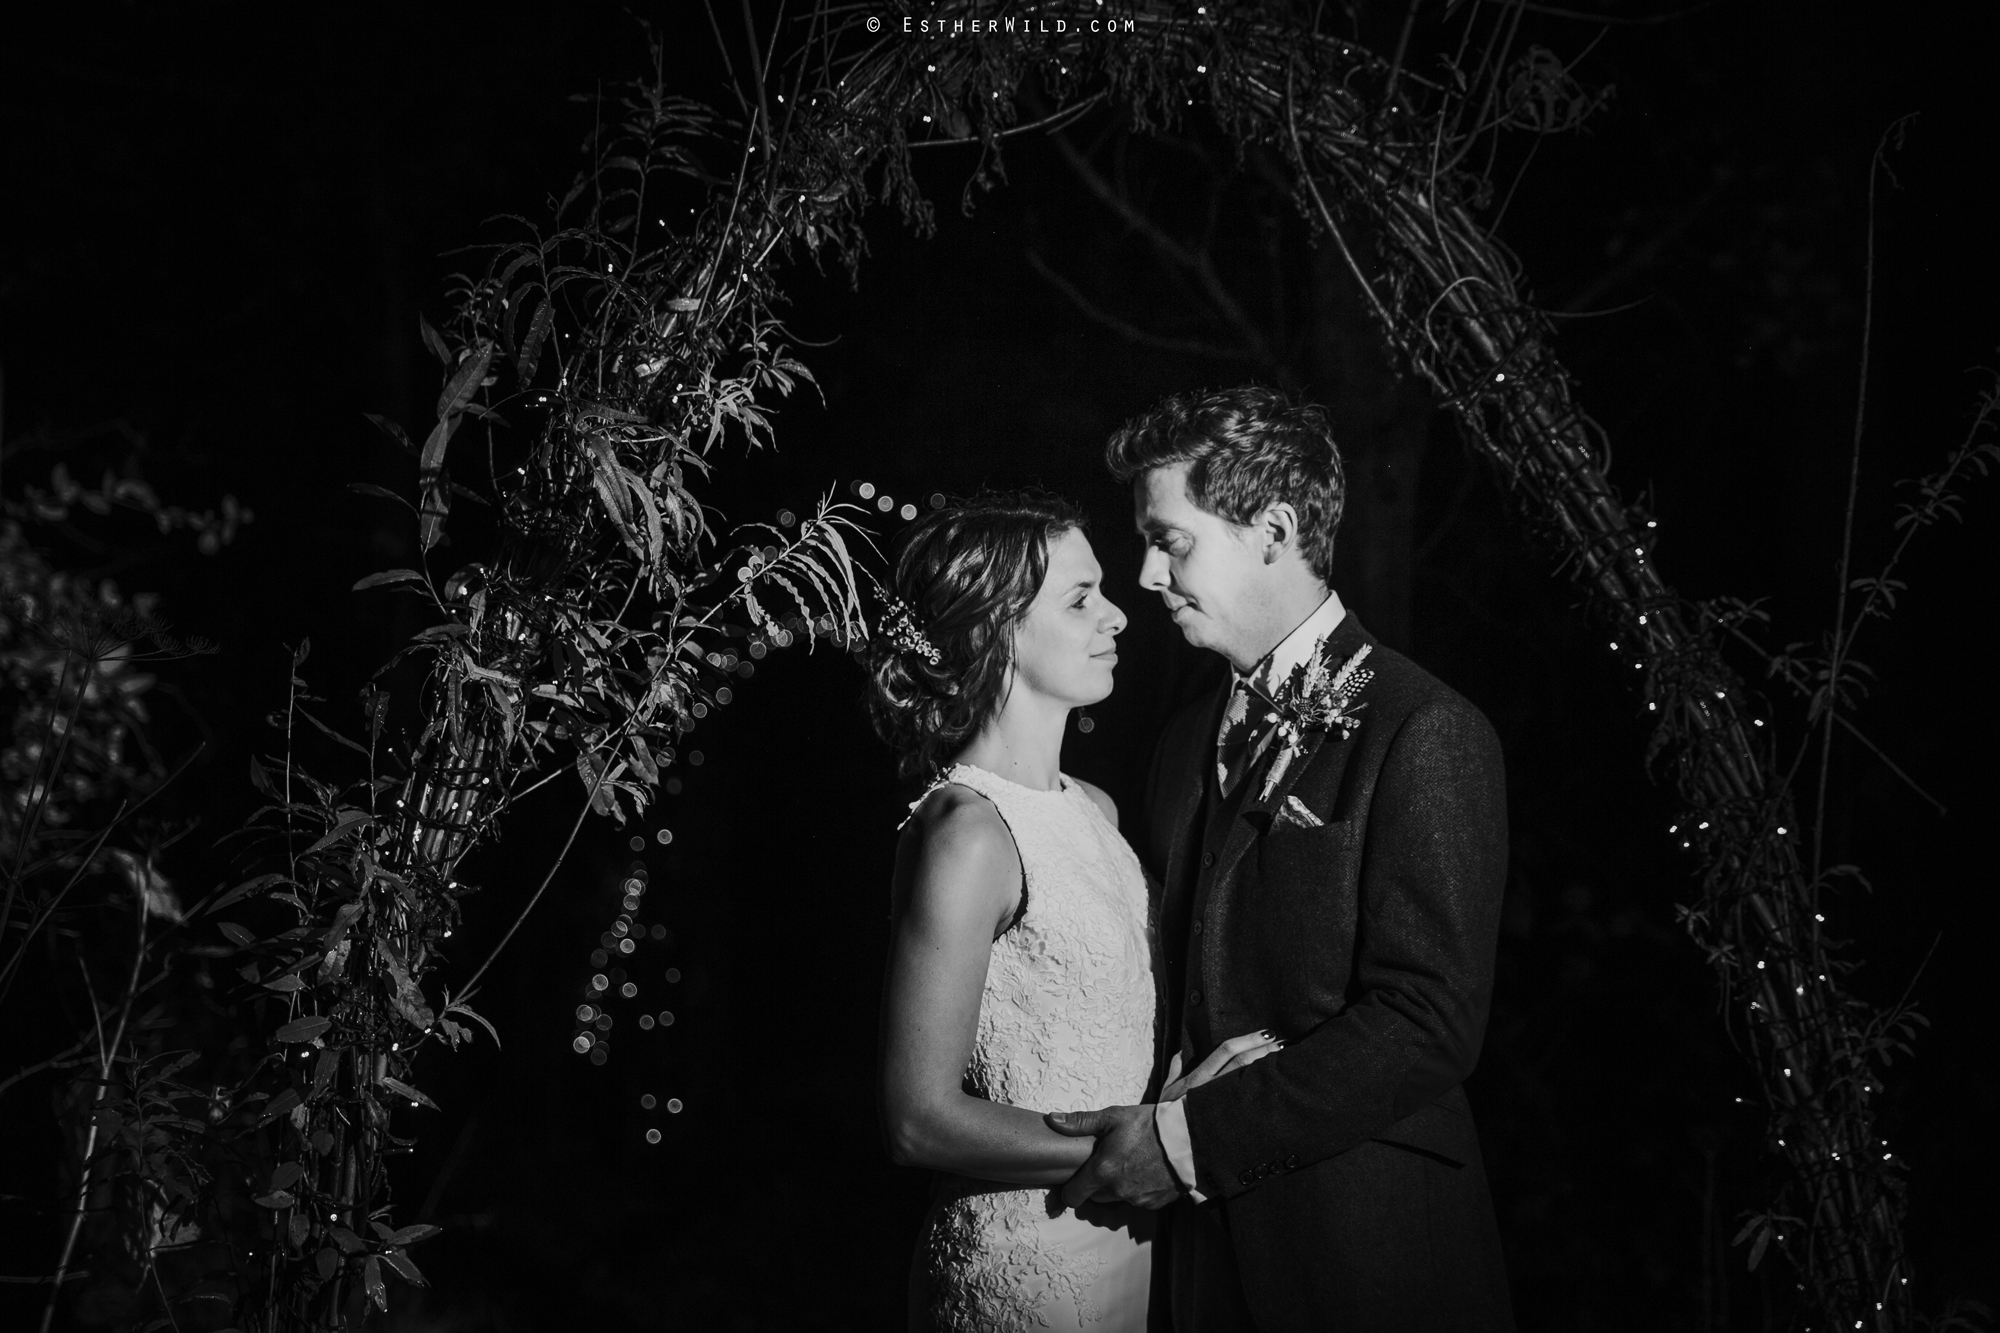 Wedding_Photographer_Chaucer_Barn_Holt_Norfolk_Country_Rustic_Venue_Copyright_Esther_Wild_IMG_2515-2.jpg